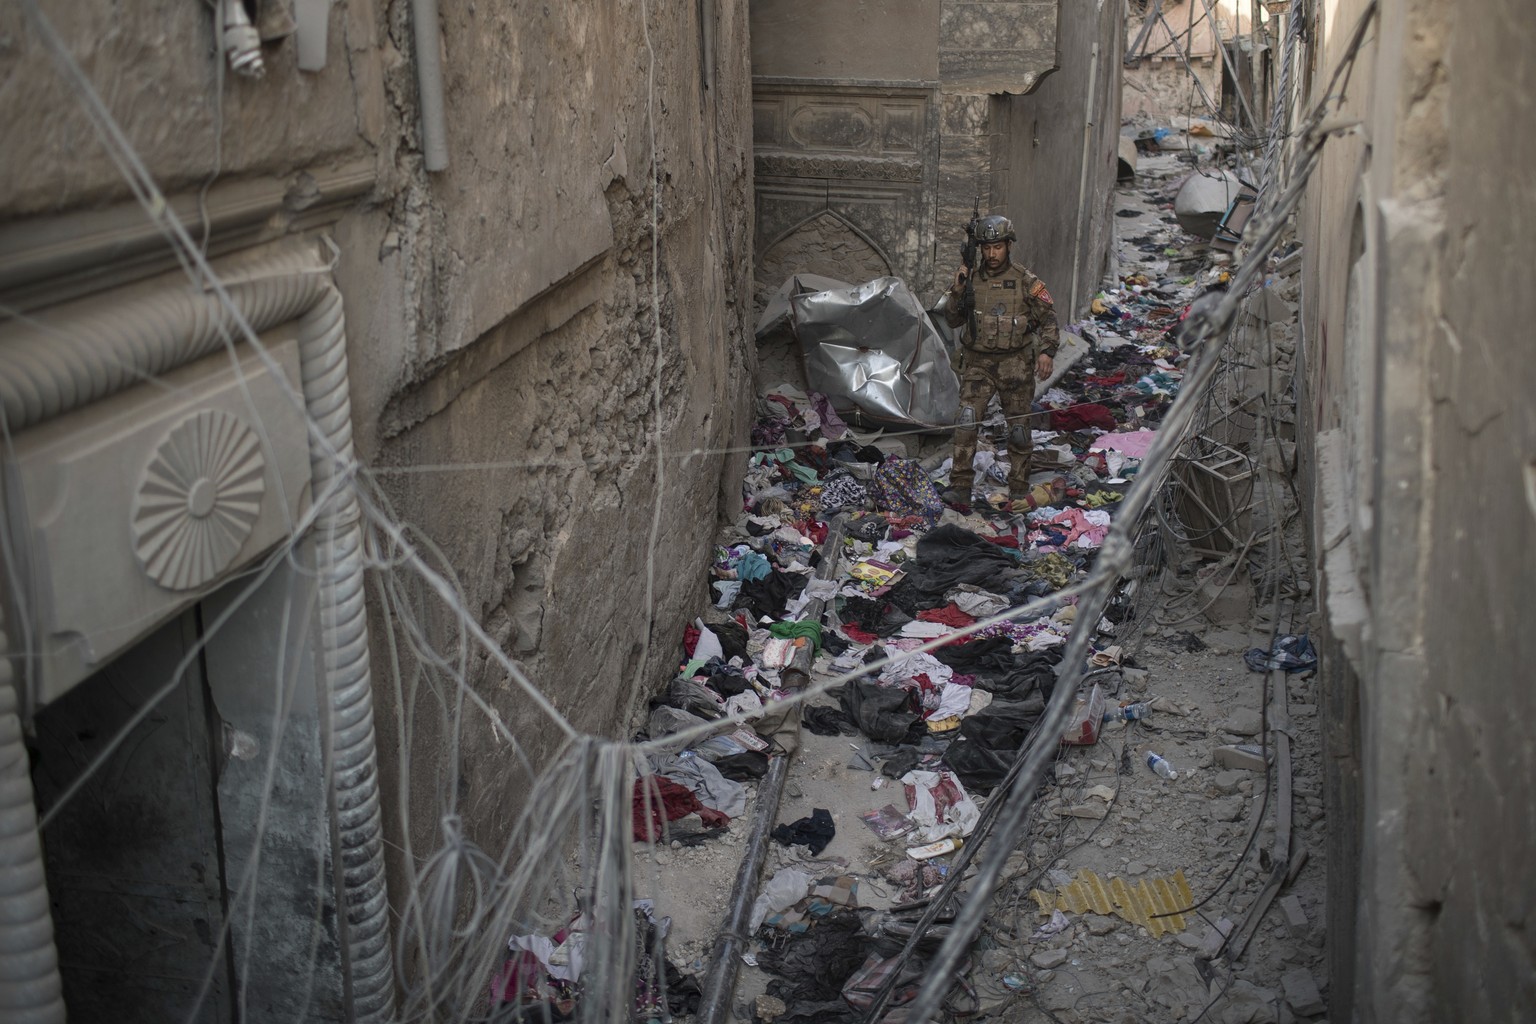 An Iraqi Special Forces soldier walks on clothes left behind by fleeing civilians in an alley as Iraqi forces continue their advance against Islamic State militants in the Old City of Mosul, Iraq, Wed ...